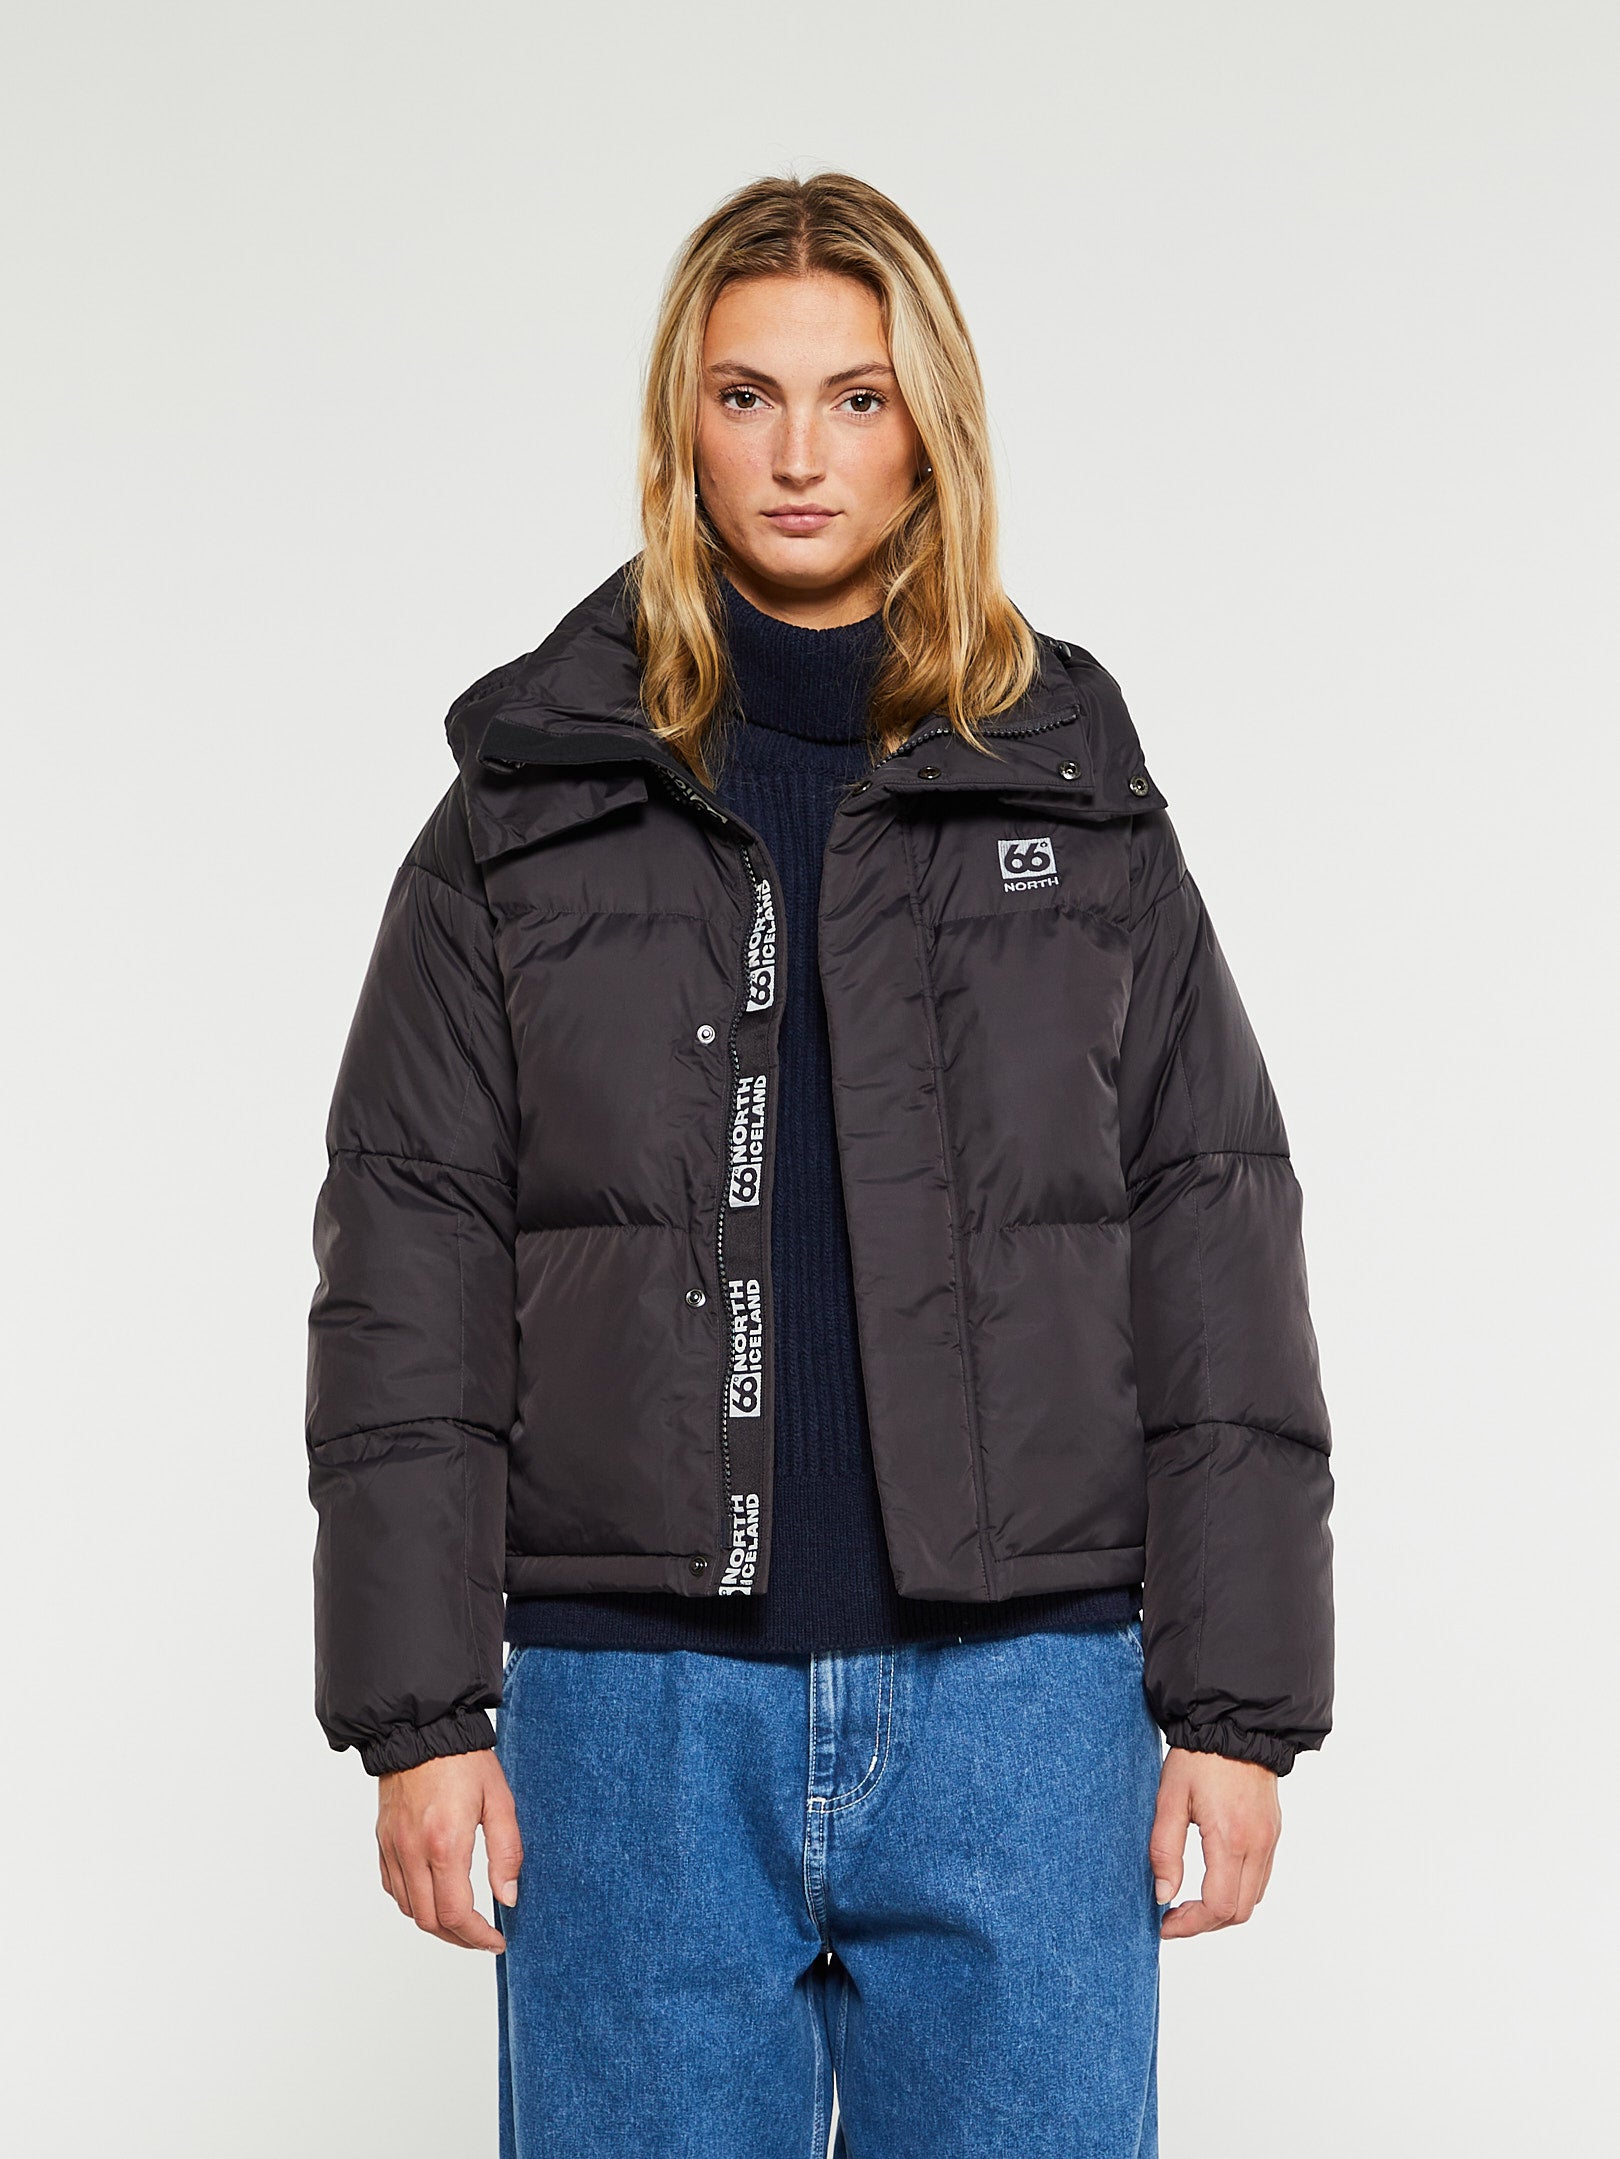 stoy for | Coats selection Shop women at the Jackets &